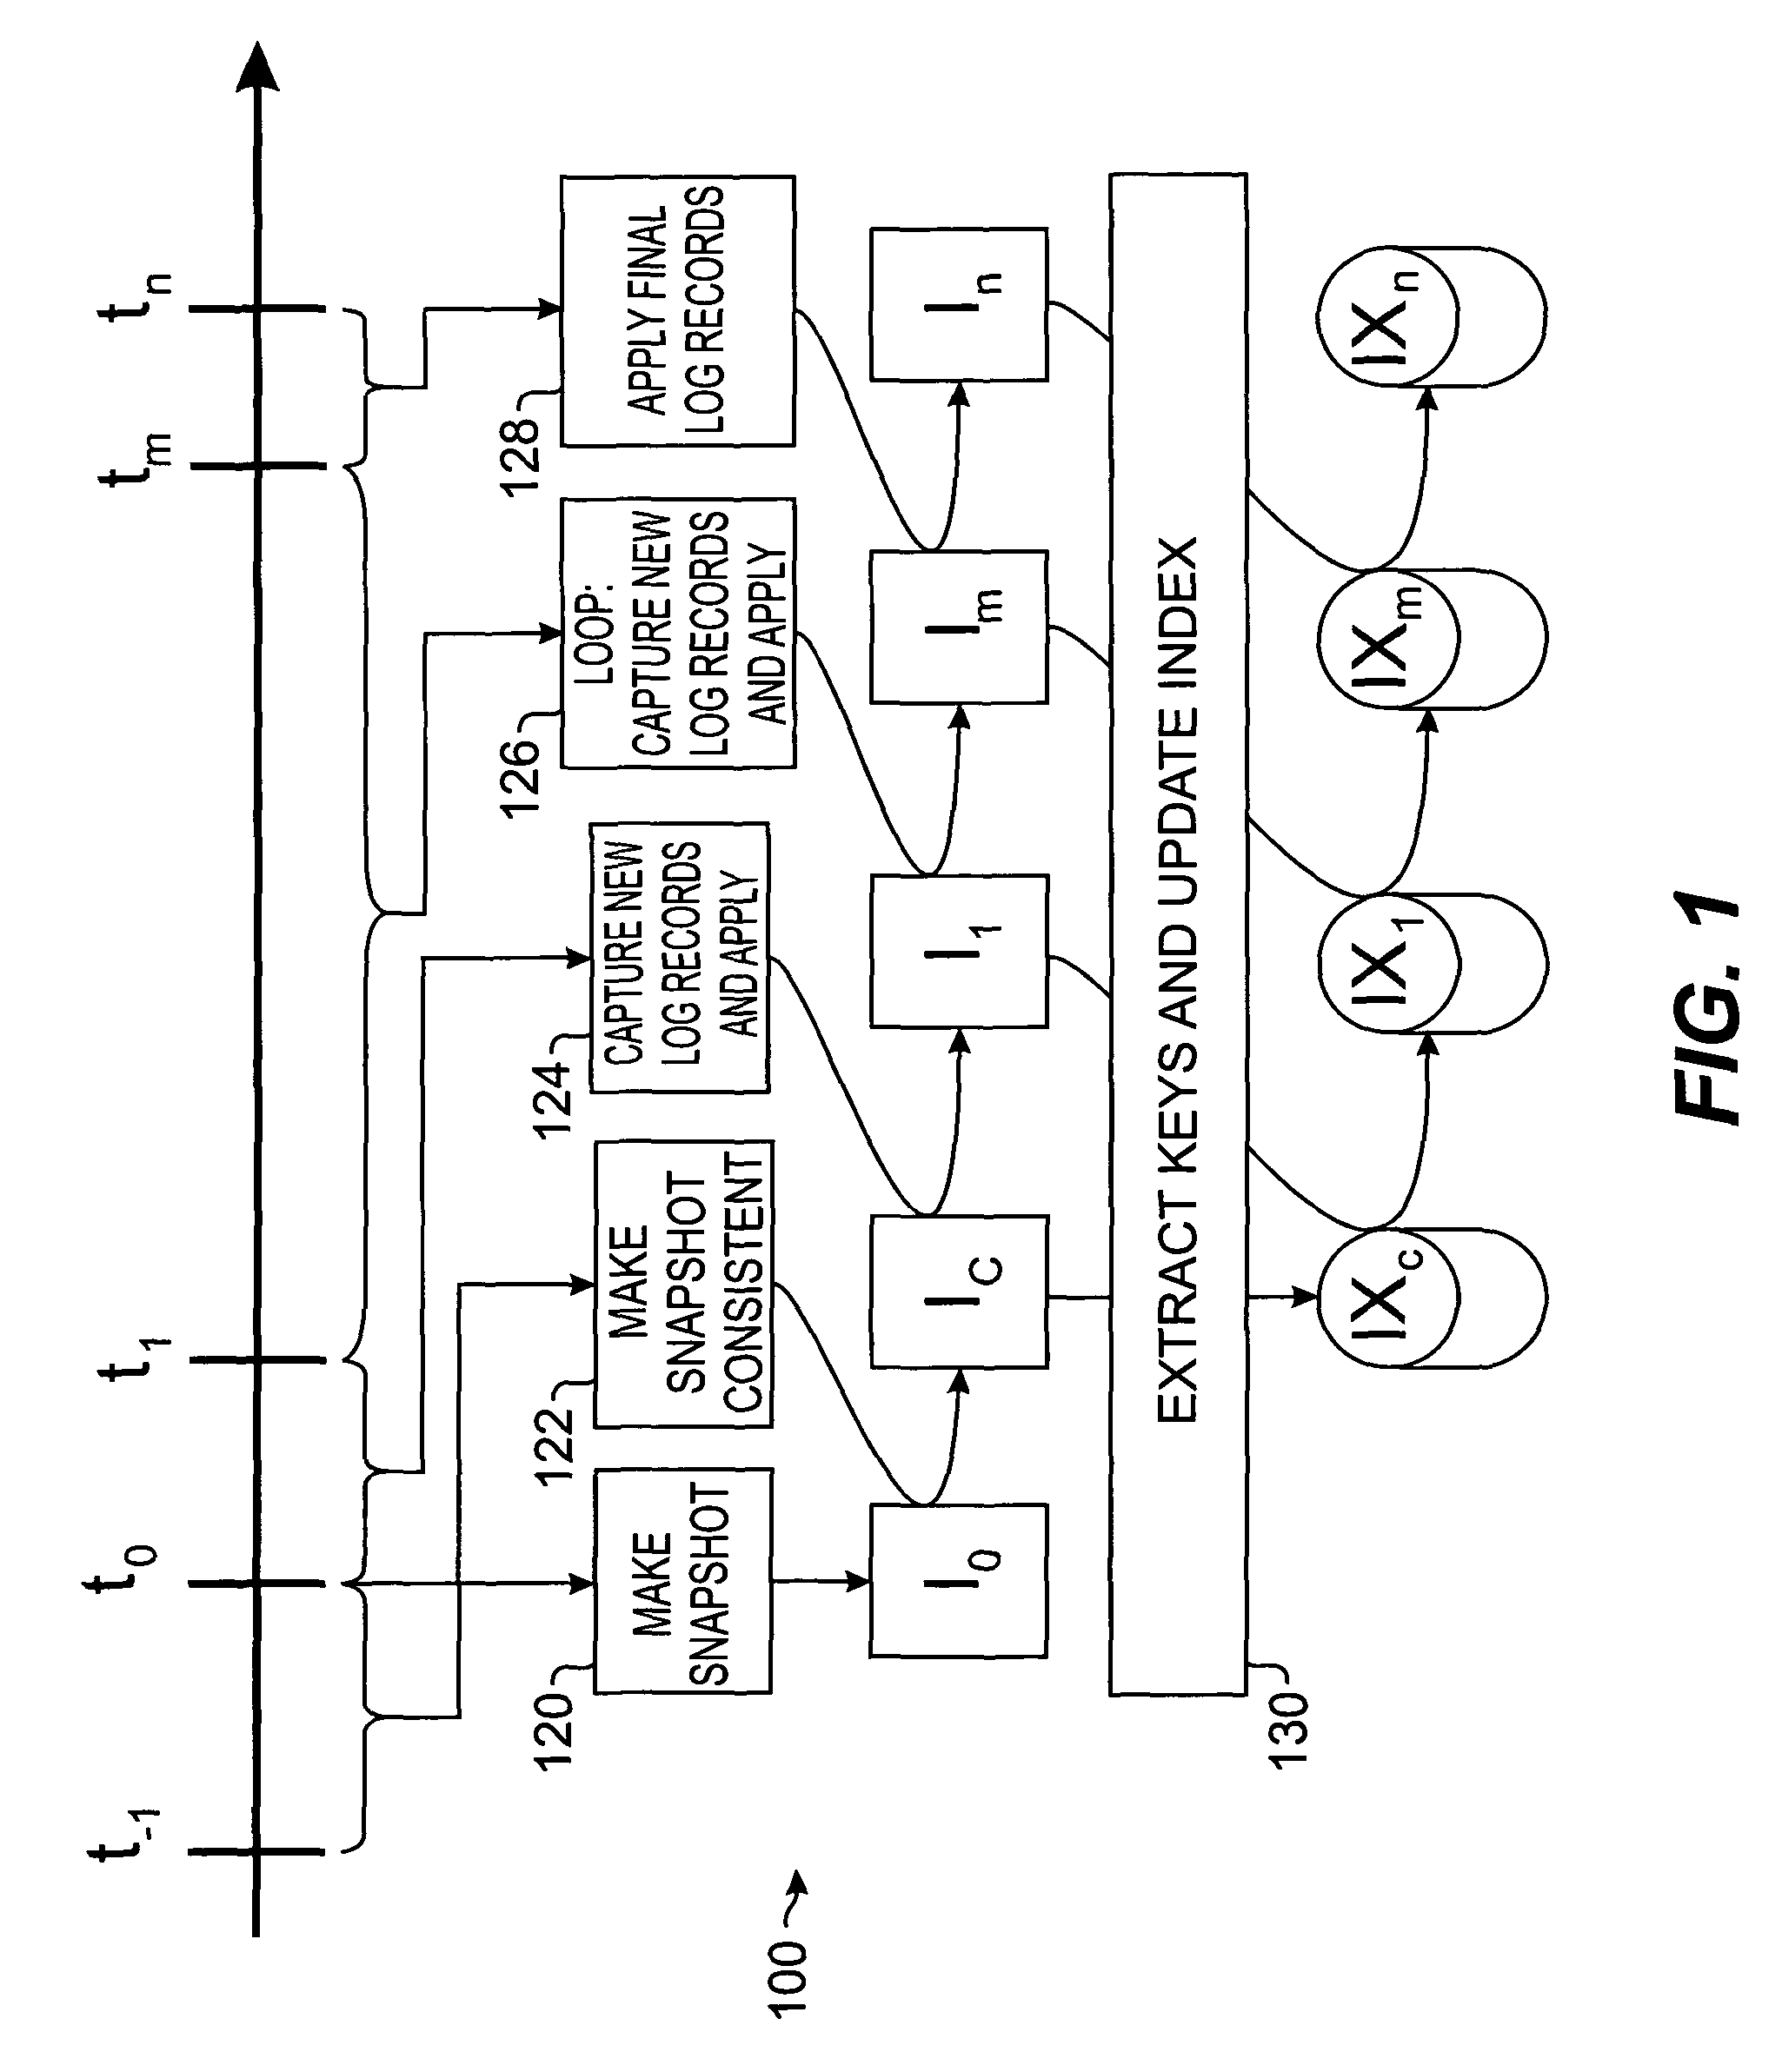 Method and apparatus for building index of source data